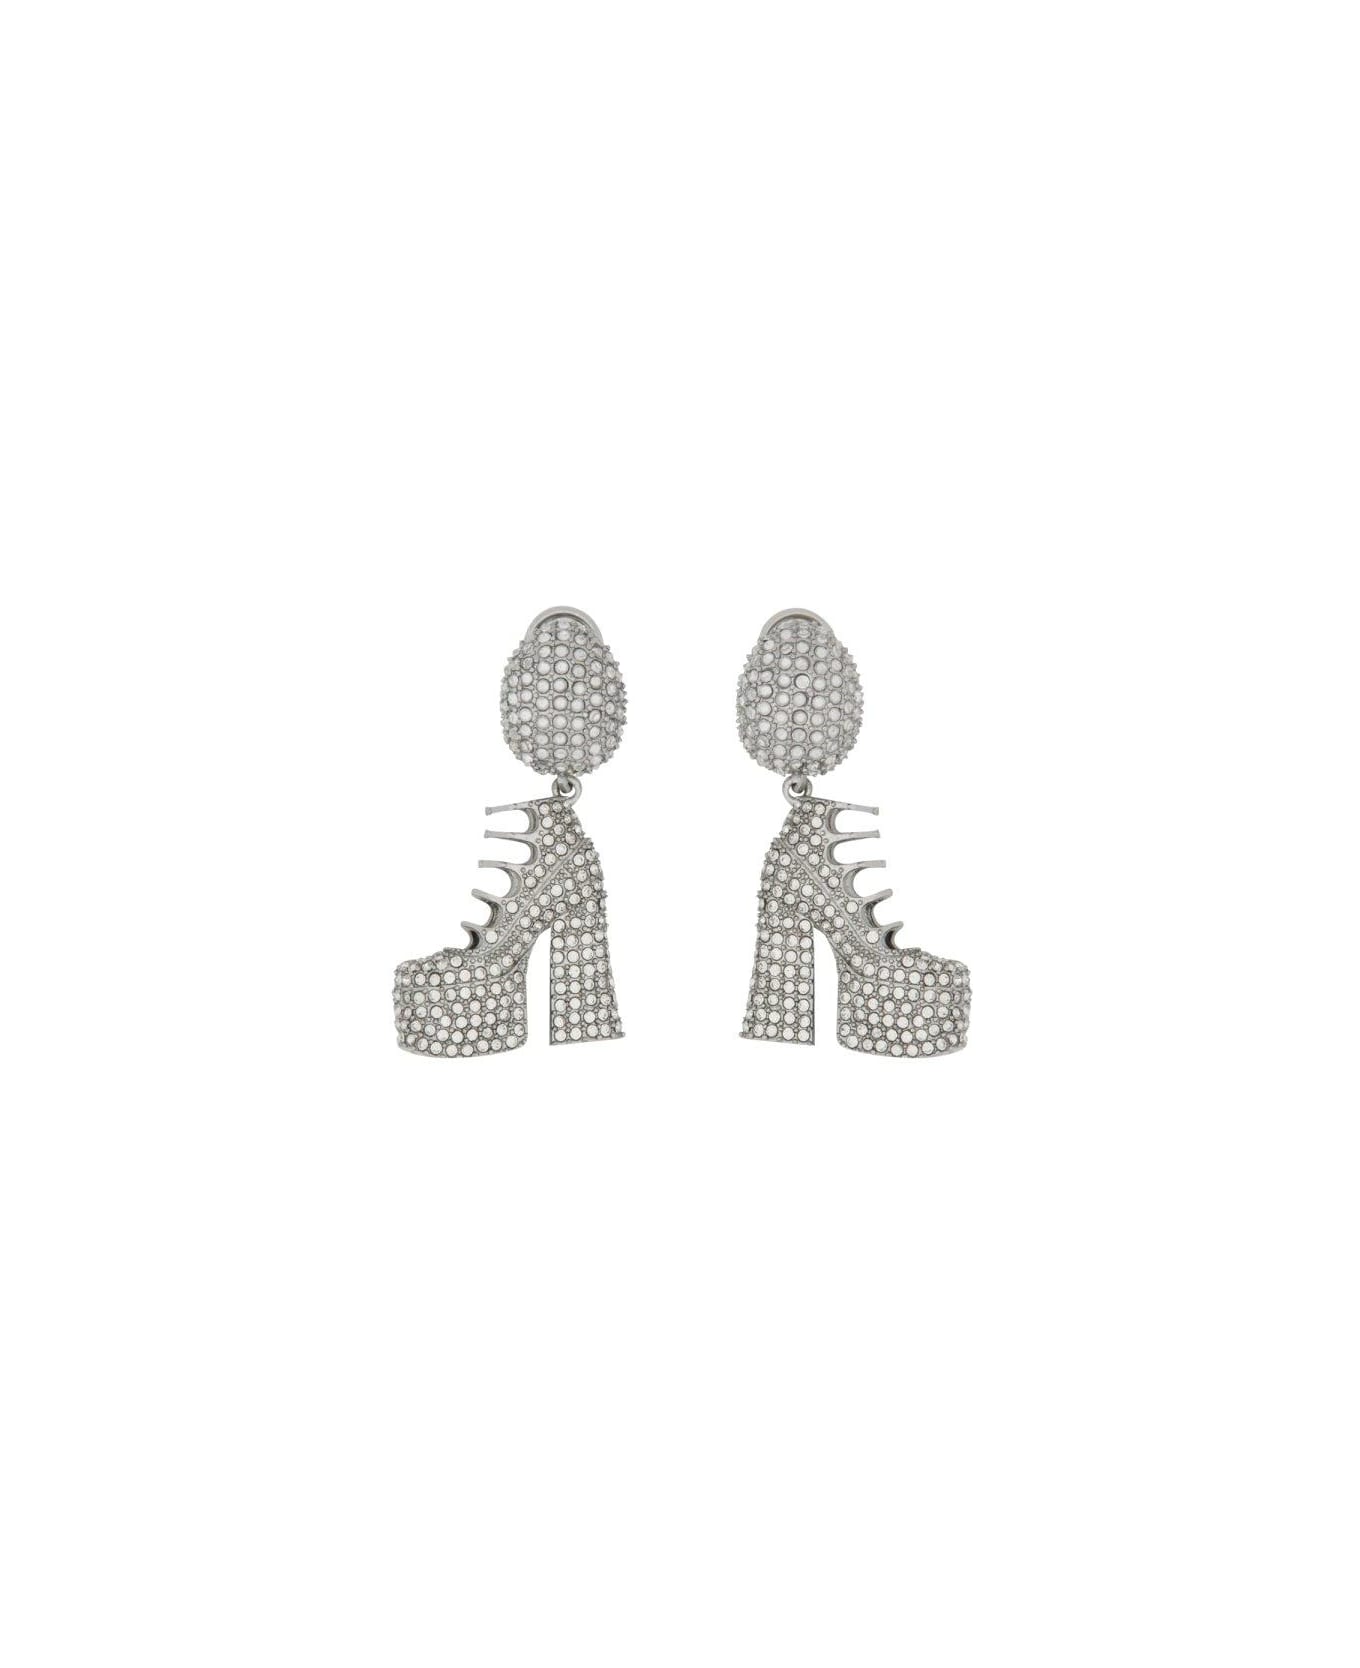 Marc Jacobs The Pave Kiki Boot Earrings - ARGENTO イヤリング